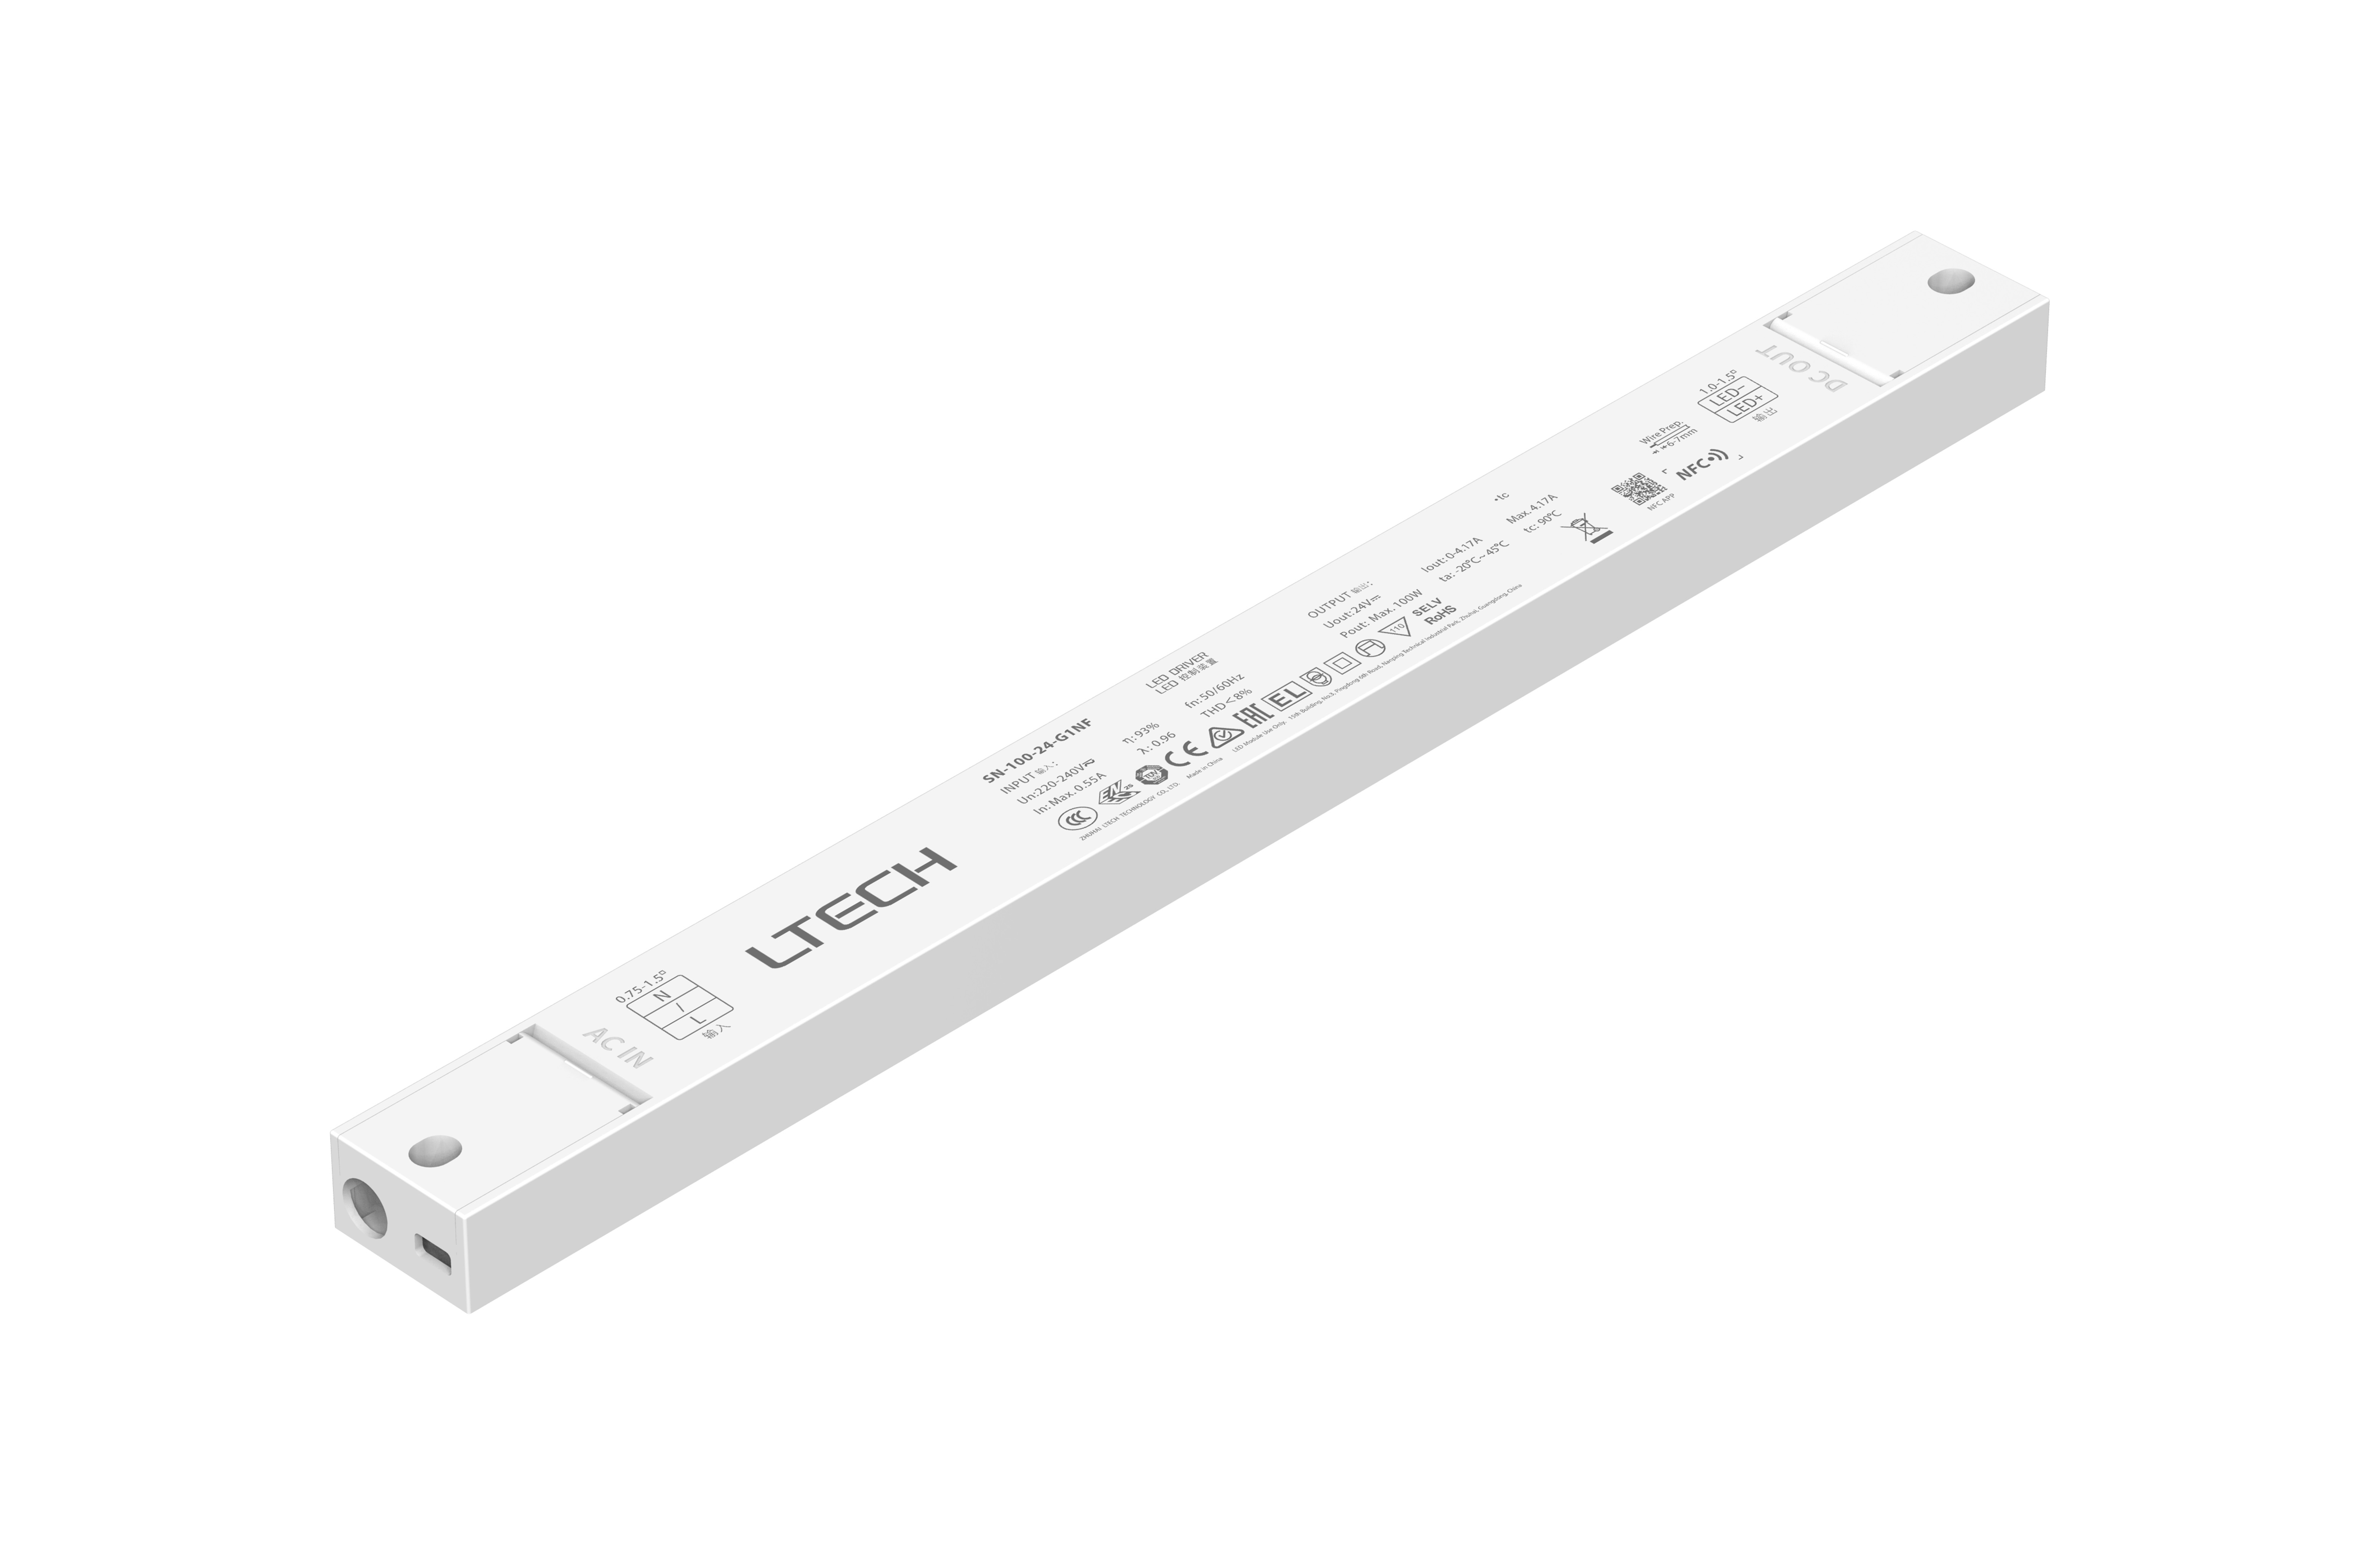 SN-100-24-G1NF-NFC  Intelligent Constant Current NFC ON/OFF LED Driver,  100W, 24VDC 4.17A , 220-240Vac, IP20, 5yrs Warrenty.